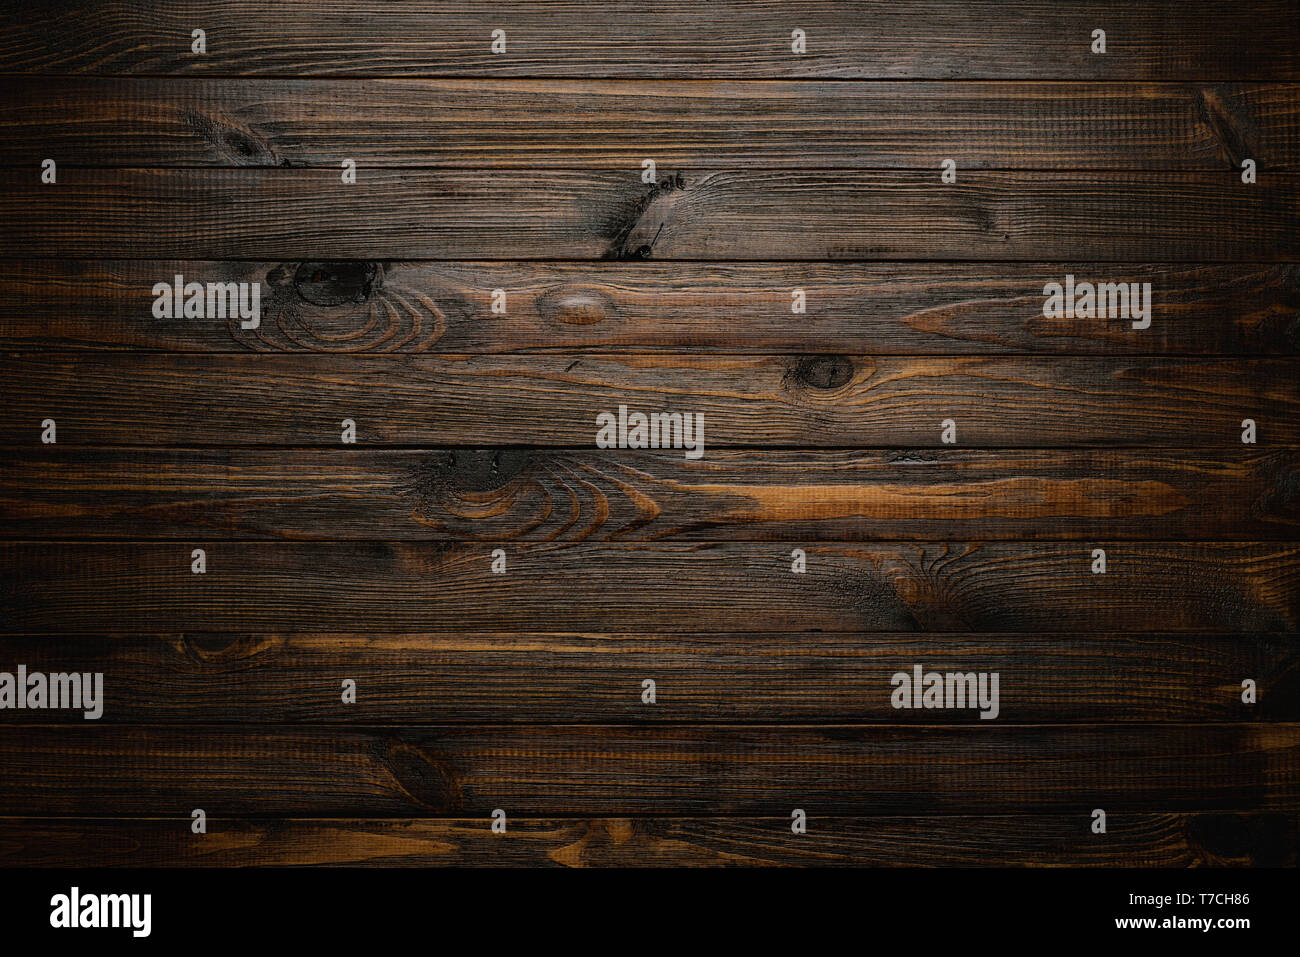 Natural wood background. Wood texture. Table of blank dark rustic planks top flat lay view. Stock Photo